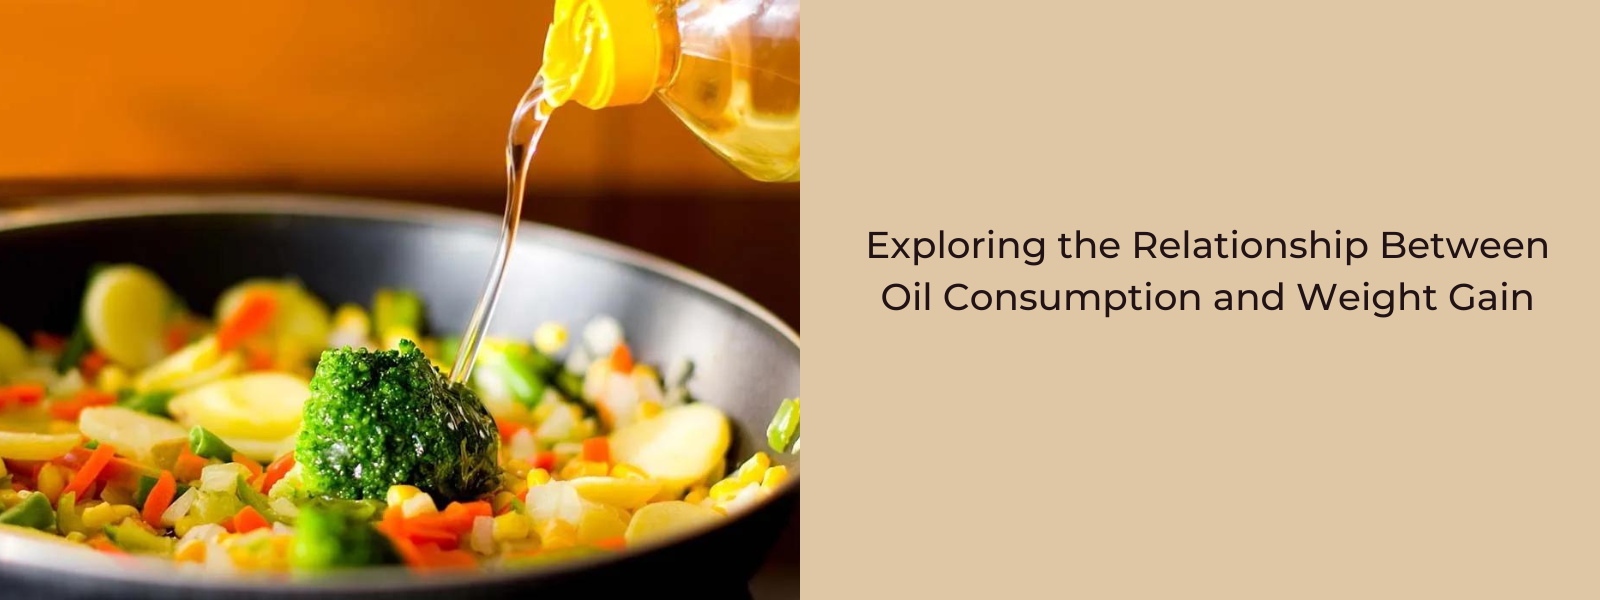 Exploring the Relationship Between Oil Consumption and Weight Gain